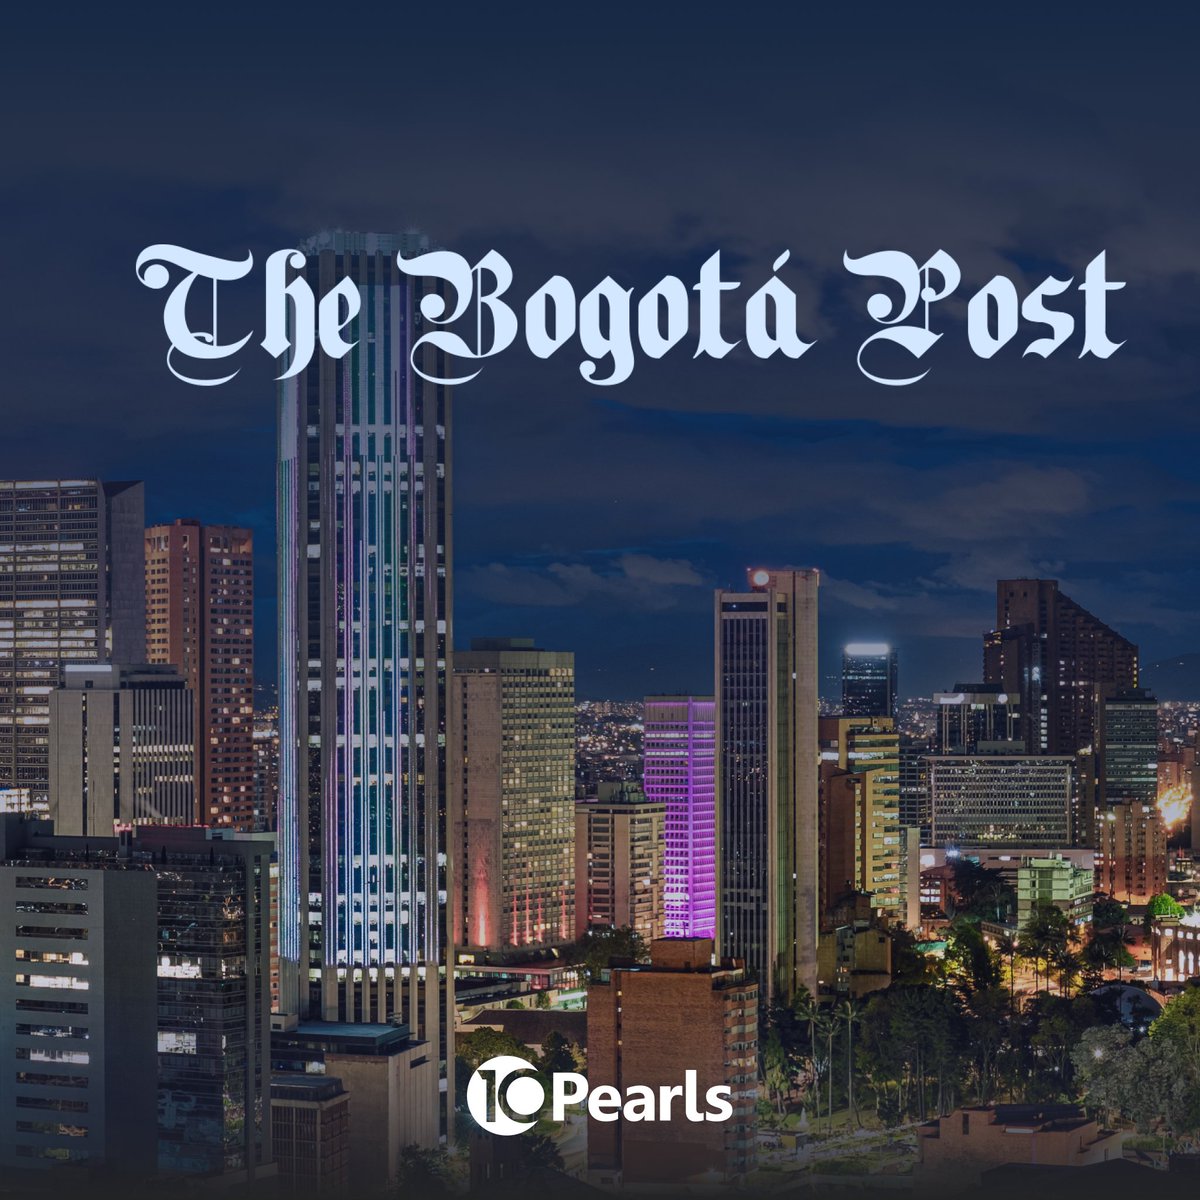 🌟 Exciting insights from our CEO, @imranaftab, in his exclusive interview with @BogotaPost! From strategic expansions into Colombia to fostering partnerships and innovation, discover how 10Pearls is shaping the digital landscape. Read more: bit.ly/42CF5rC